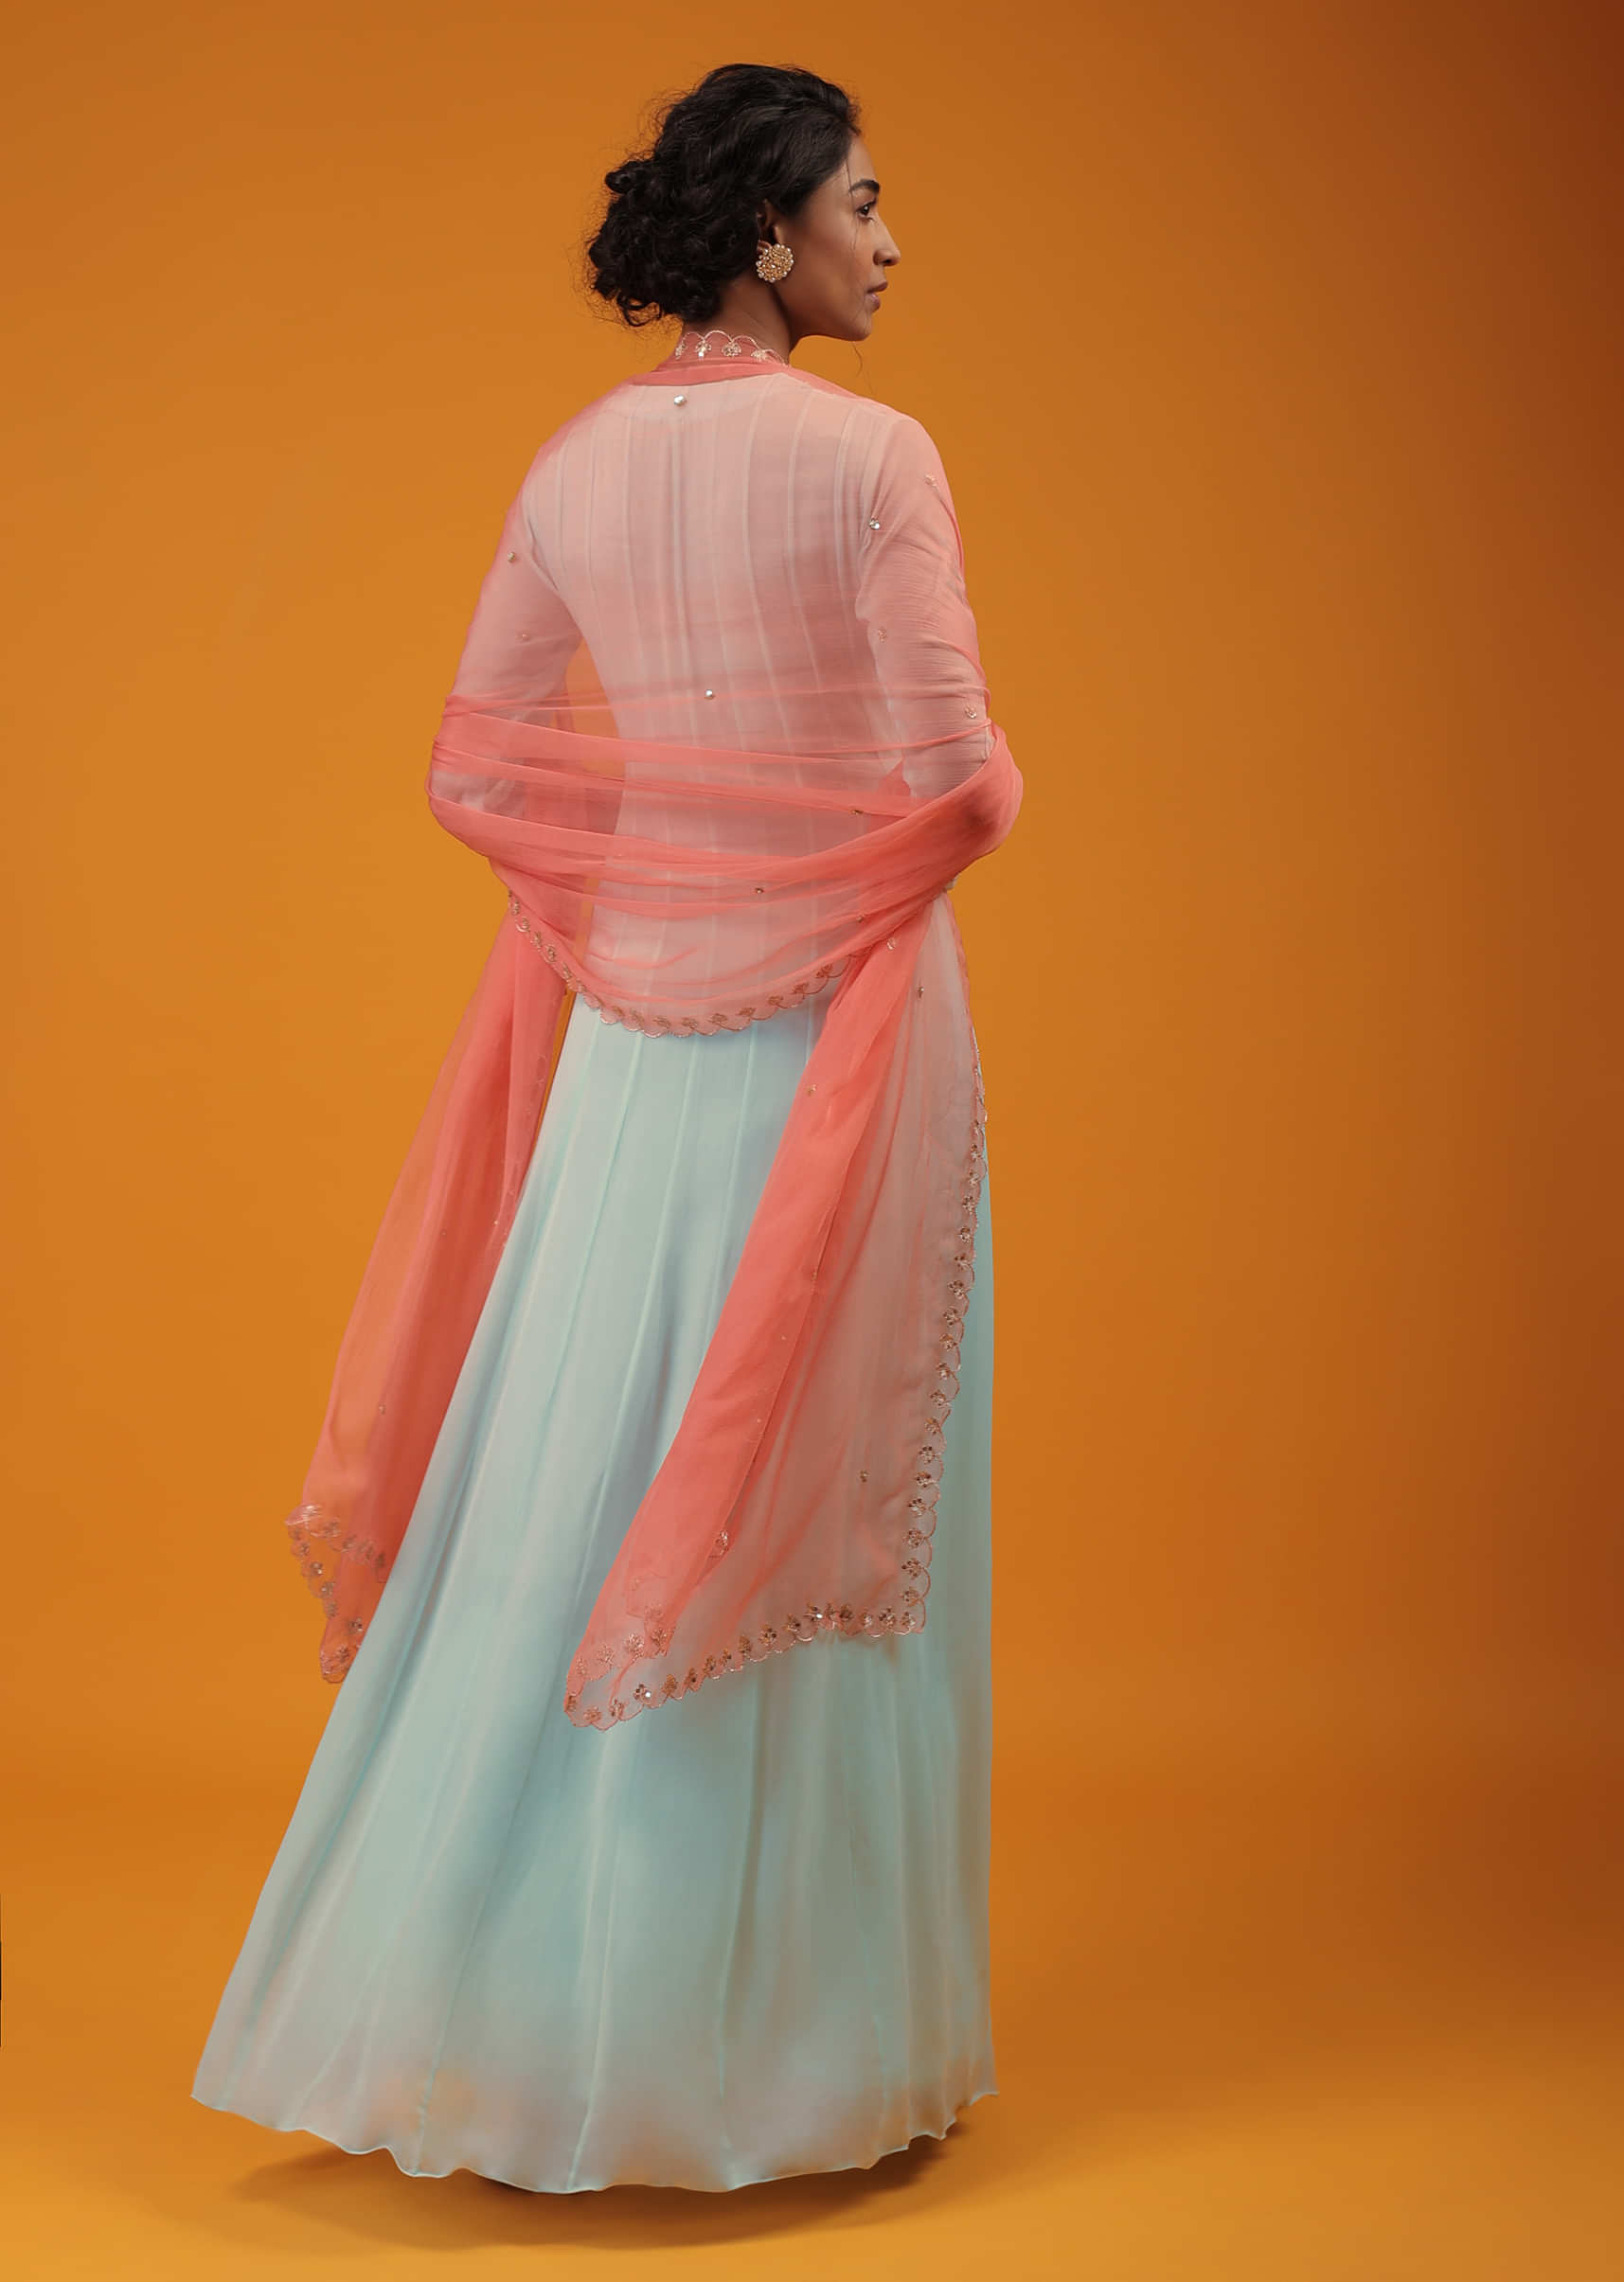 Mint Green Anarkali Suit In Georgette Dress With Moti, Sequins And Zari Work